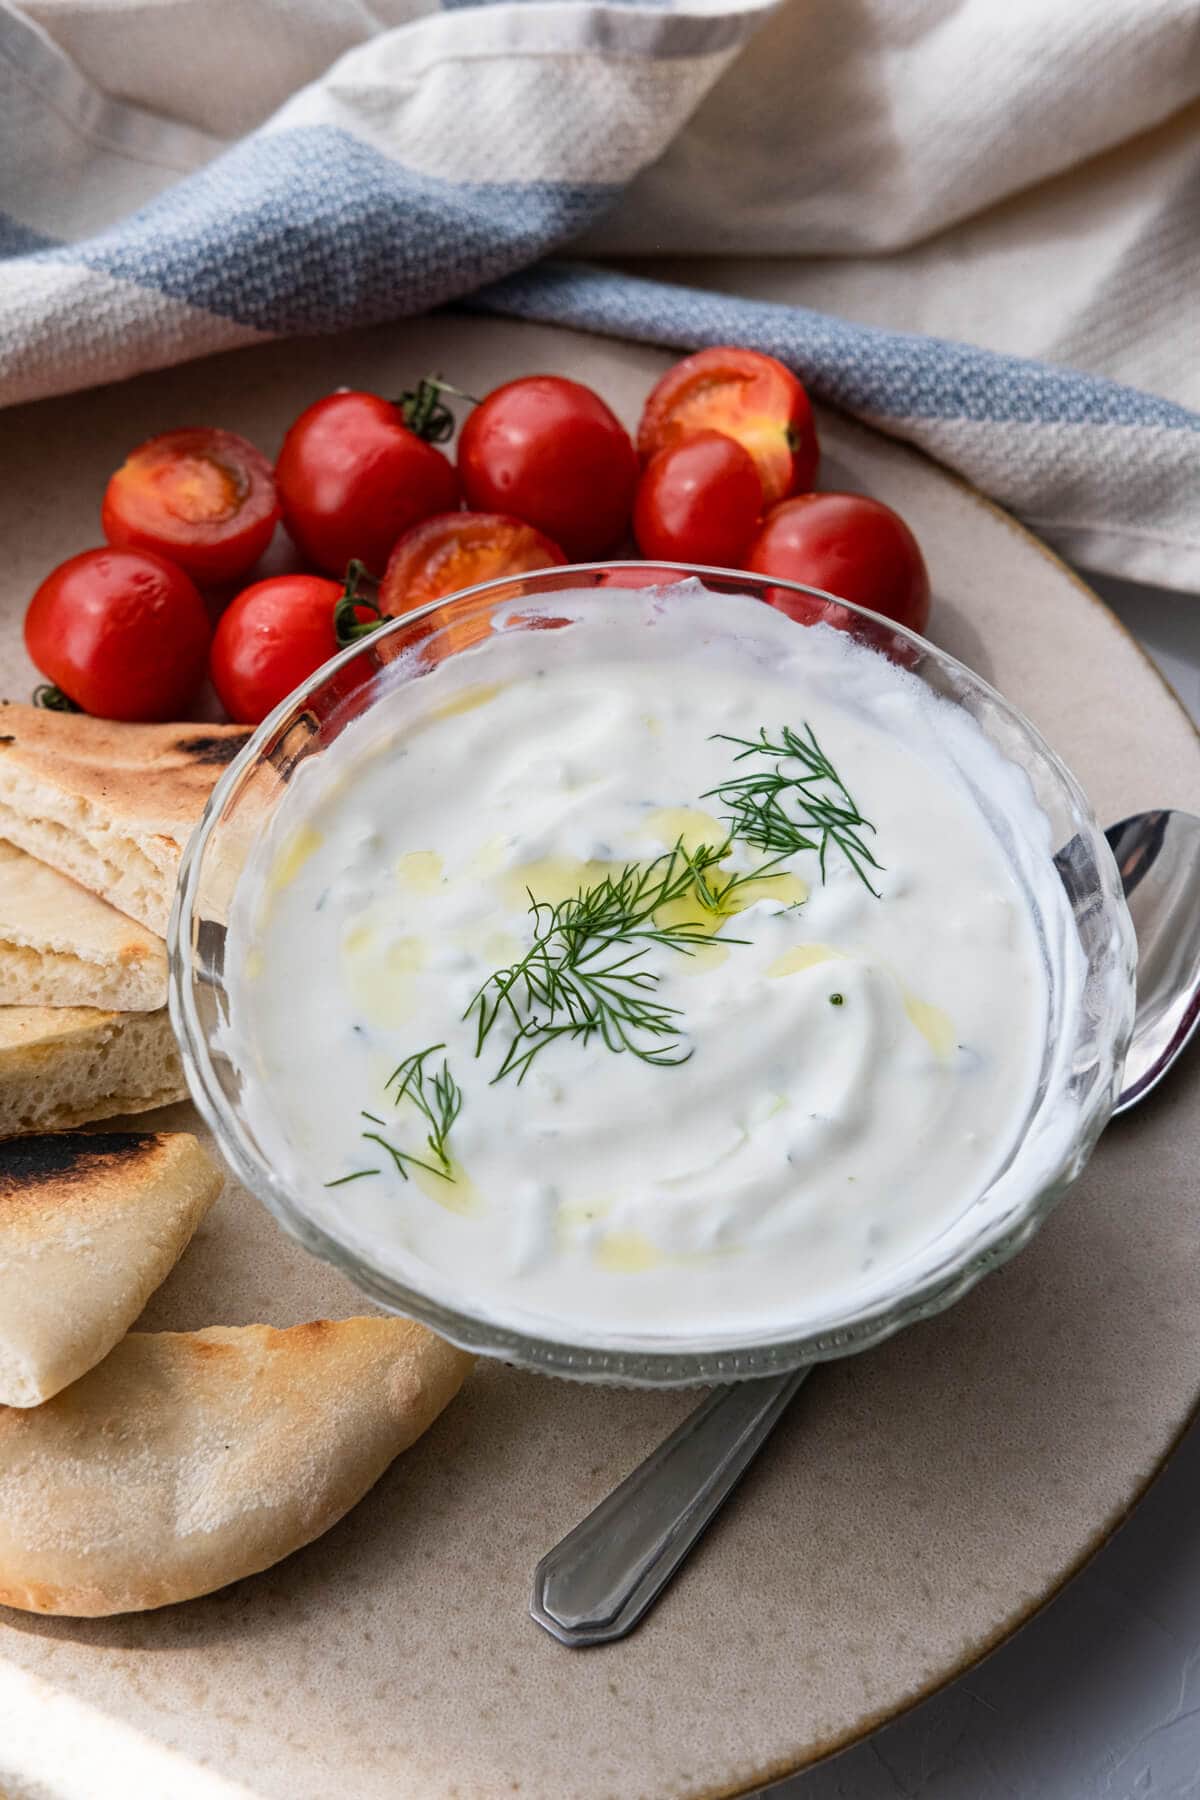 Rich and creamy classic tzatziki sauce served in a small bowl alongside cherry tomatoes and pita bread. 